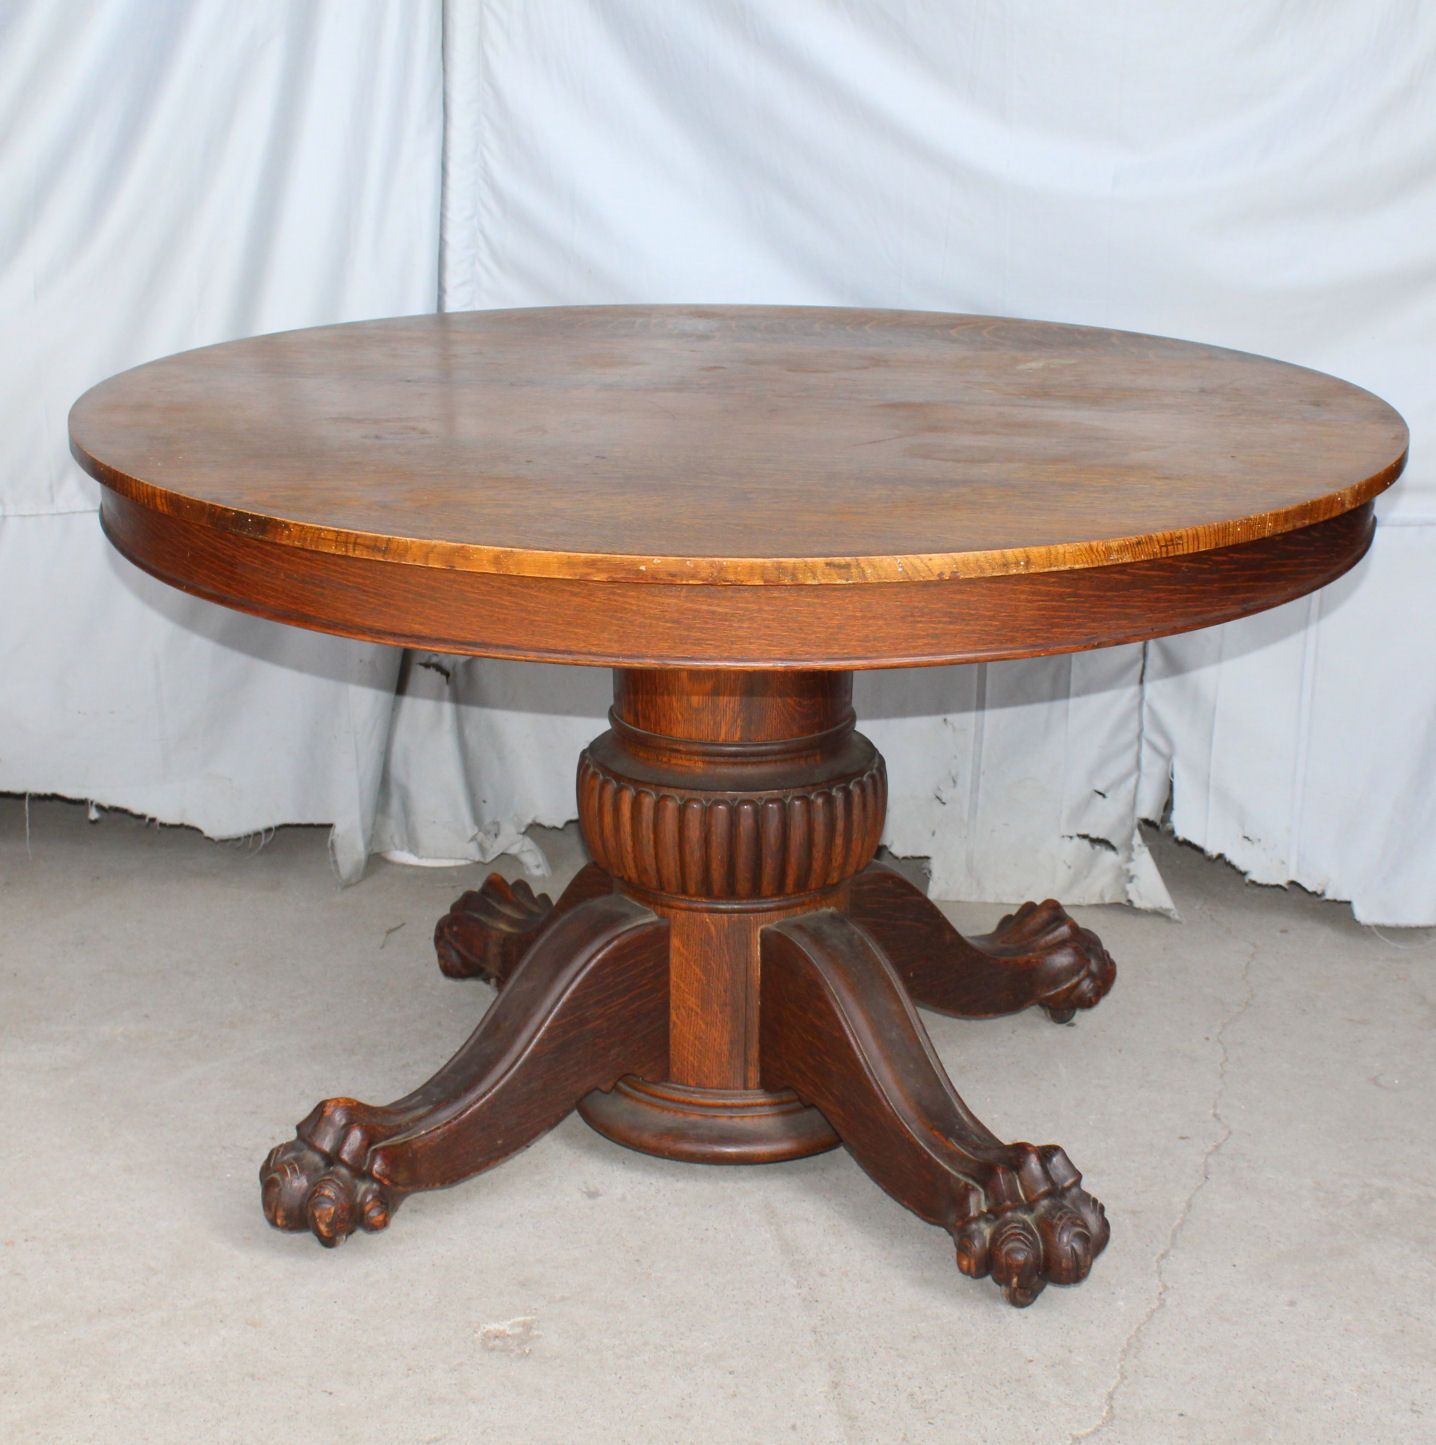 Bargain John'S Antiques | Antique Round Oak Dining Table For Most Recently Released Vintage Brown Round Dining Tables (View 5 of 15)